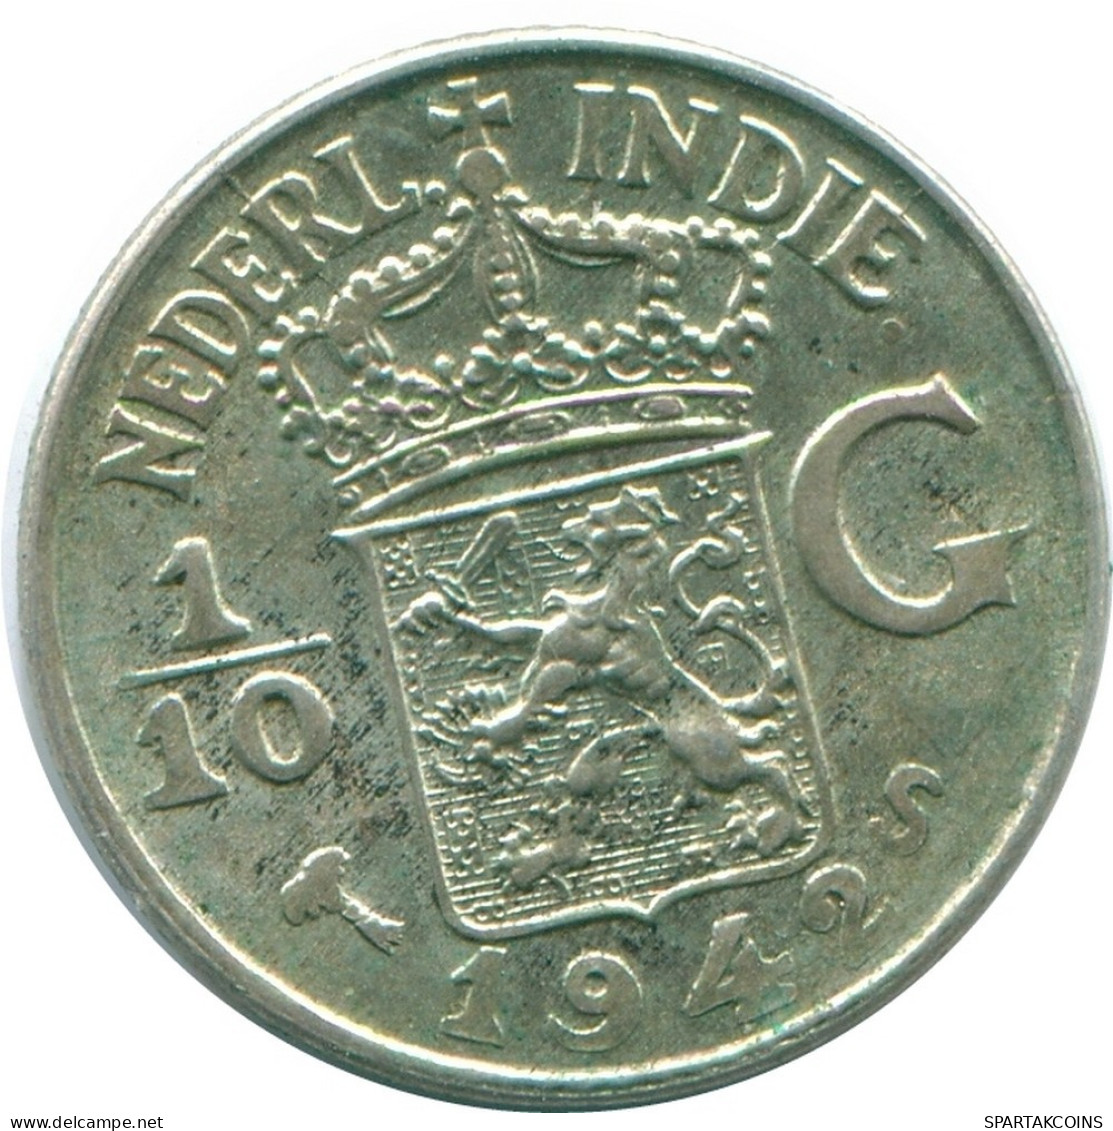 1/10 GULDEN 1942 NETHERLANDS EAST INDIES SILVER Colonial Coin #NL13870.3.U.A - Dutch East Indies